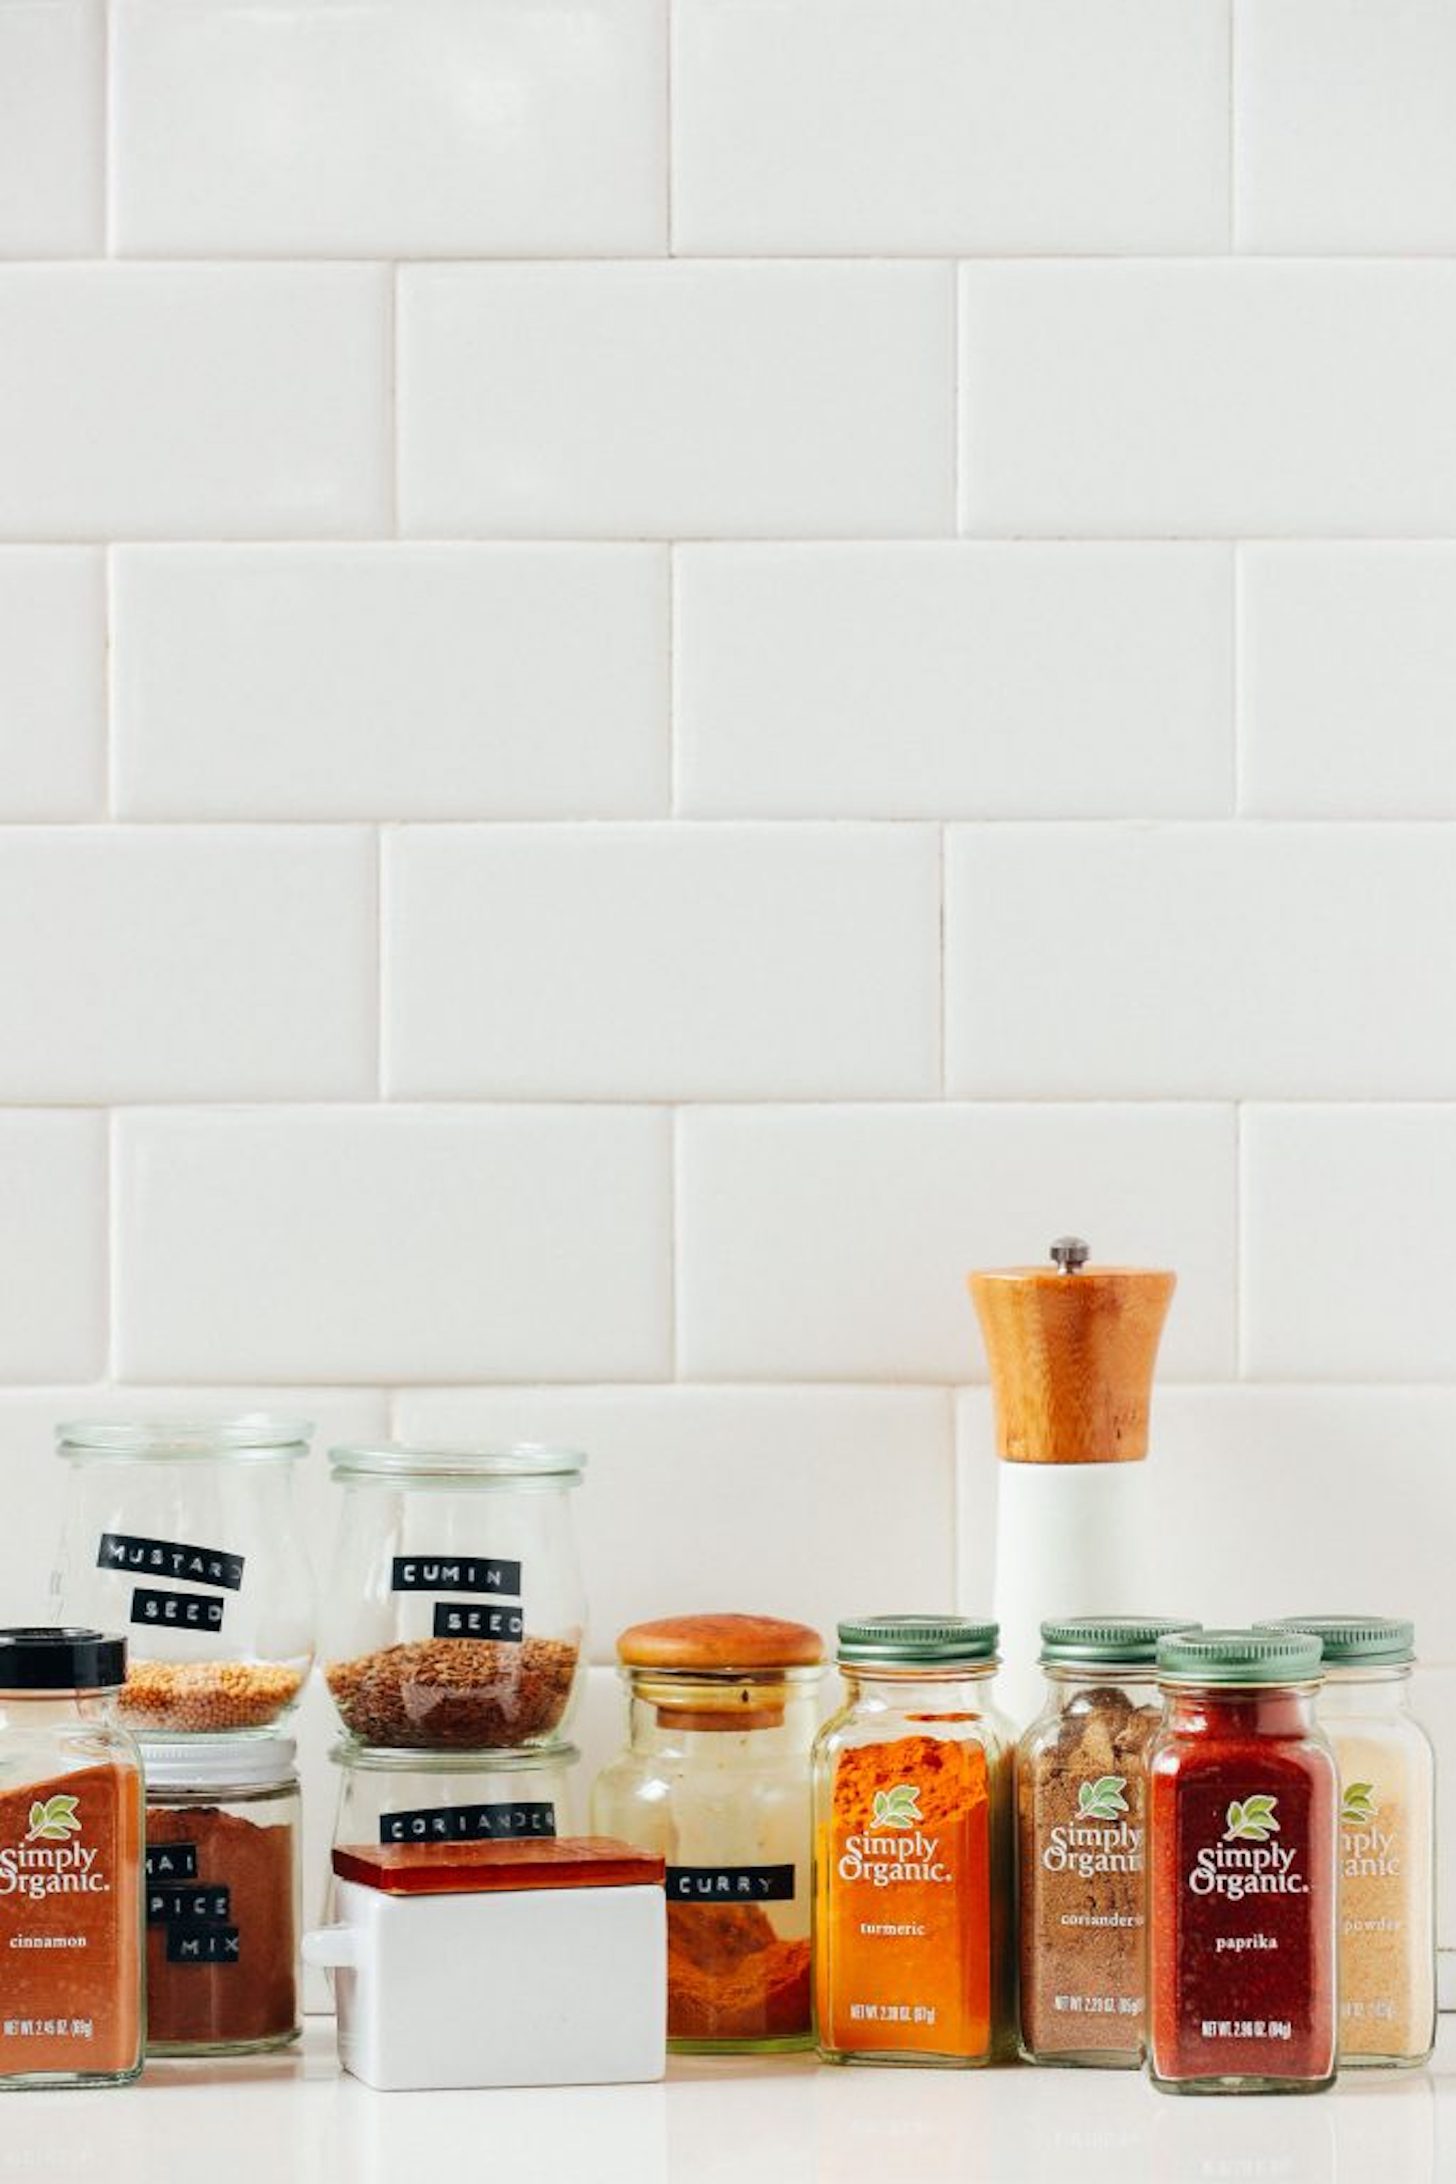 https://minimalistbaker.com/wp-content/uploads/2020/04/How-to-Stock-your-Pantry-Ingredients-Minimalist-Baker-14-708x1024-1.jpg